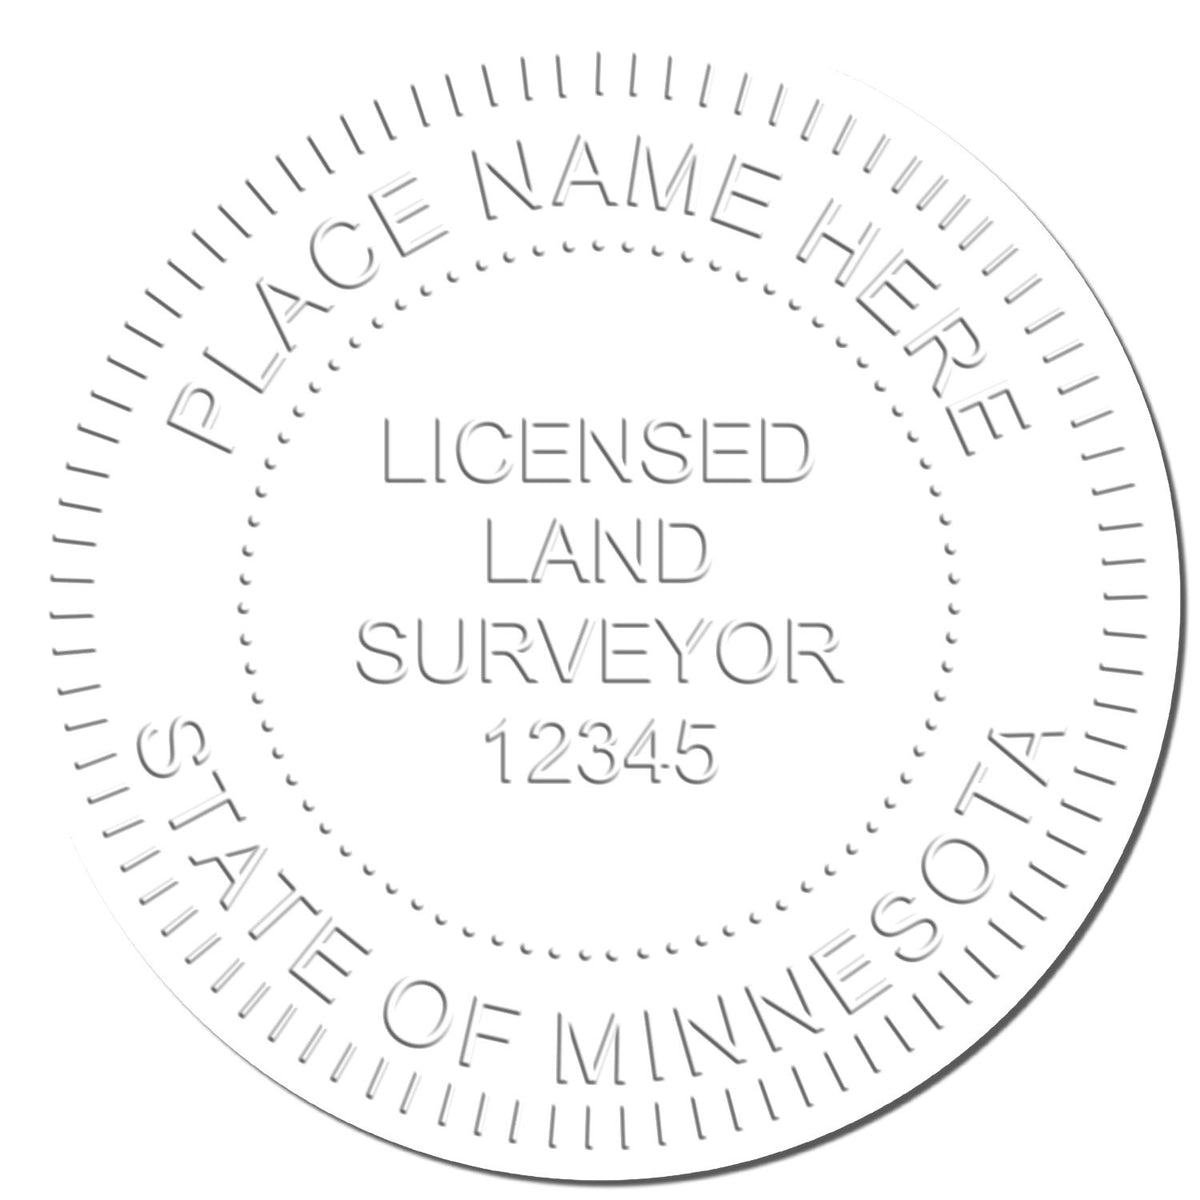 This paper is stamped with a sample imprint of the State of Minnesota Soft Land Surveyor Embossing Seal, signifying its quality and reliability.